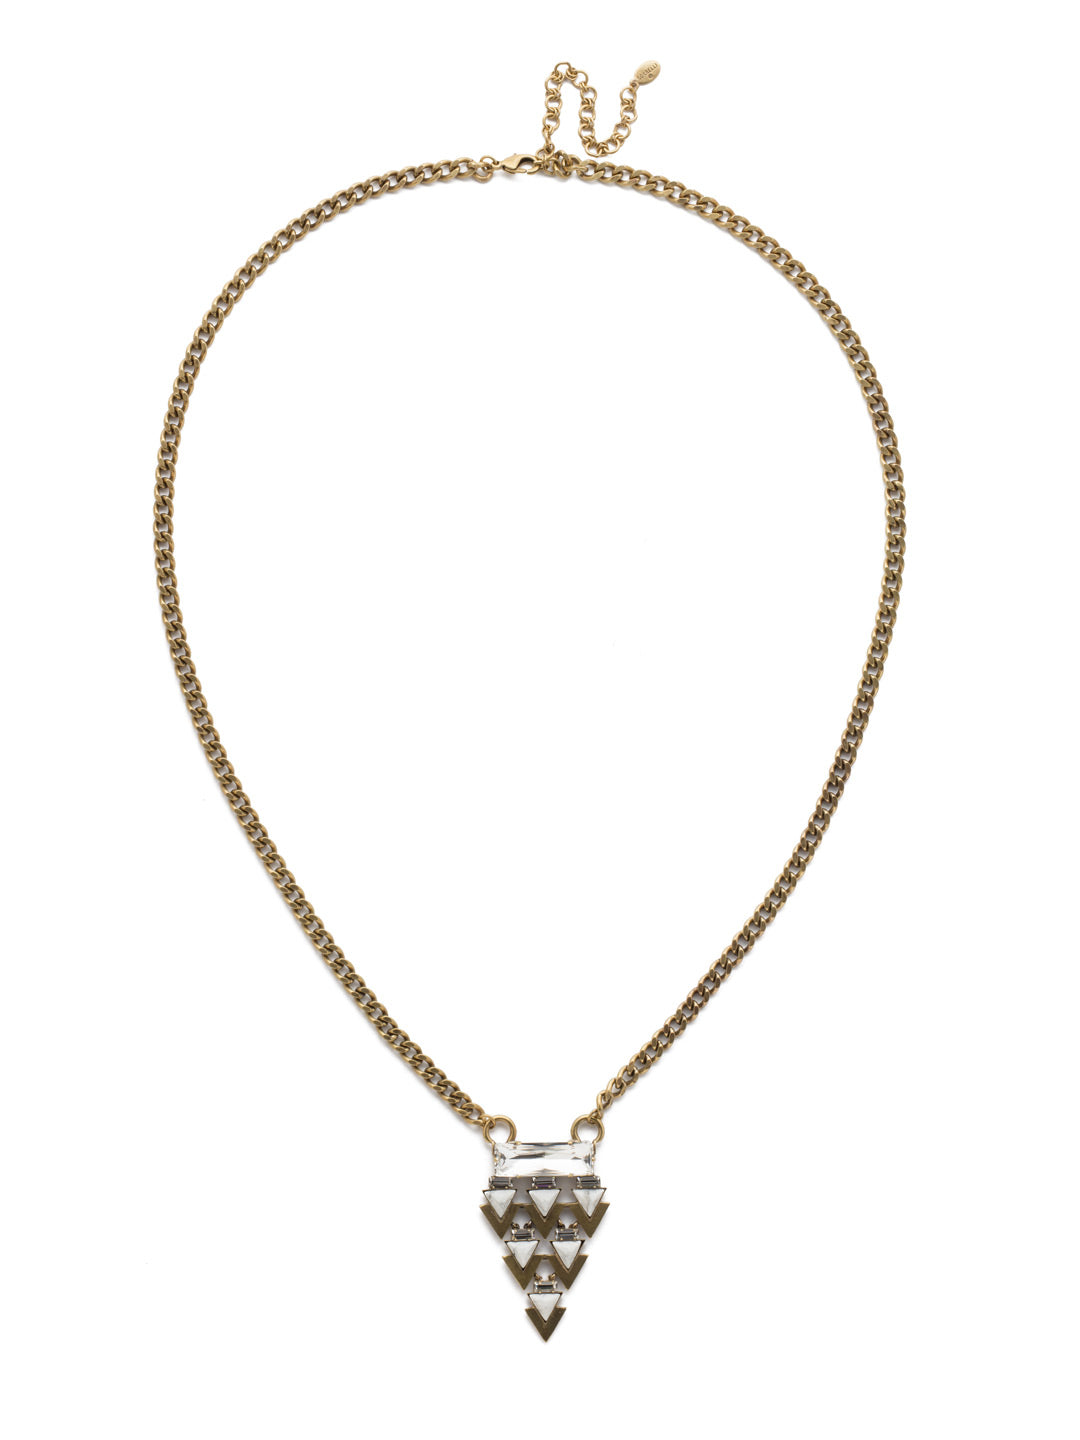 Eroh Pendant Necklace Pendant Necklace - NEB6AGIND - <p>A dramatic pendant designed with triangular stones in an arrow formation connects gracefully to a central baguette stone connecting the statement pendant to a solid, edgy curb chain. Edgy and chic, this necklace can be worn with anything. From Sorrelli's Industrial collection in our Antique Gold-tone finish.</p>